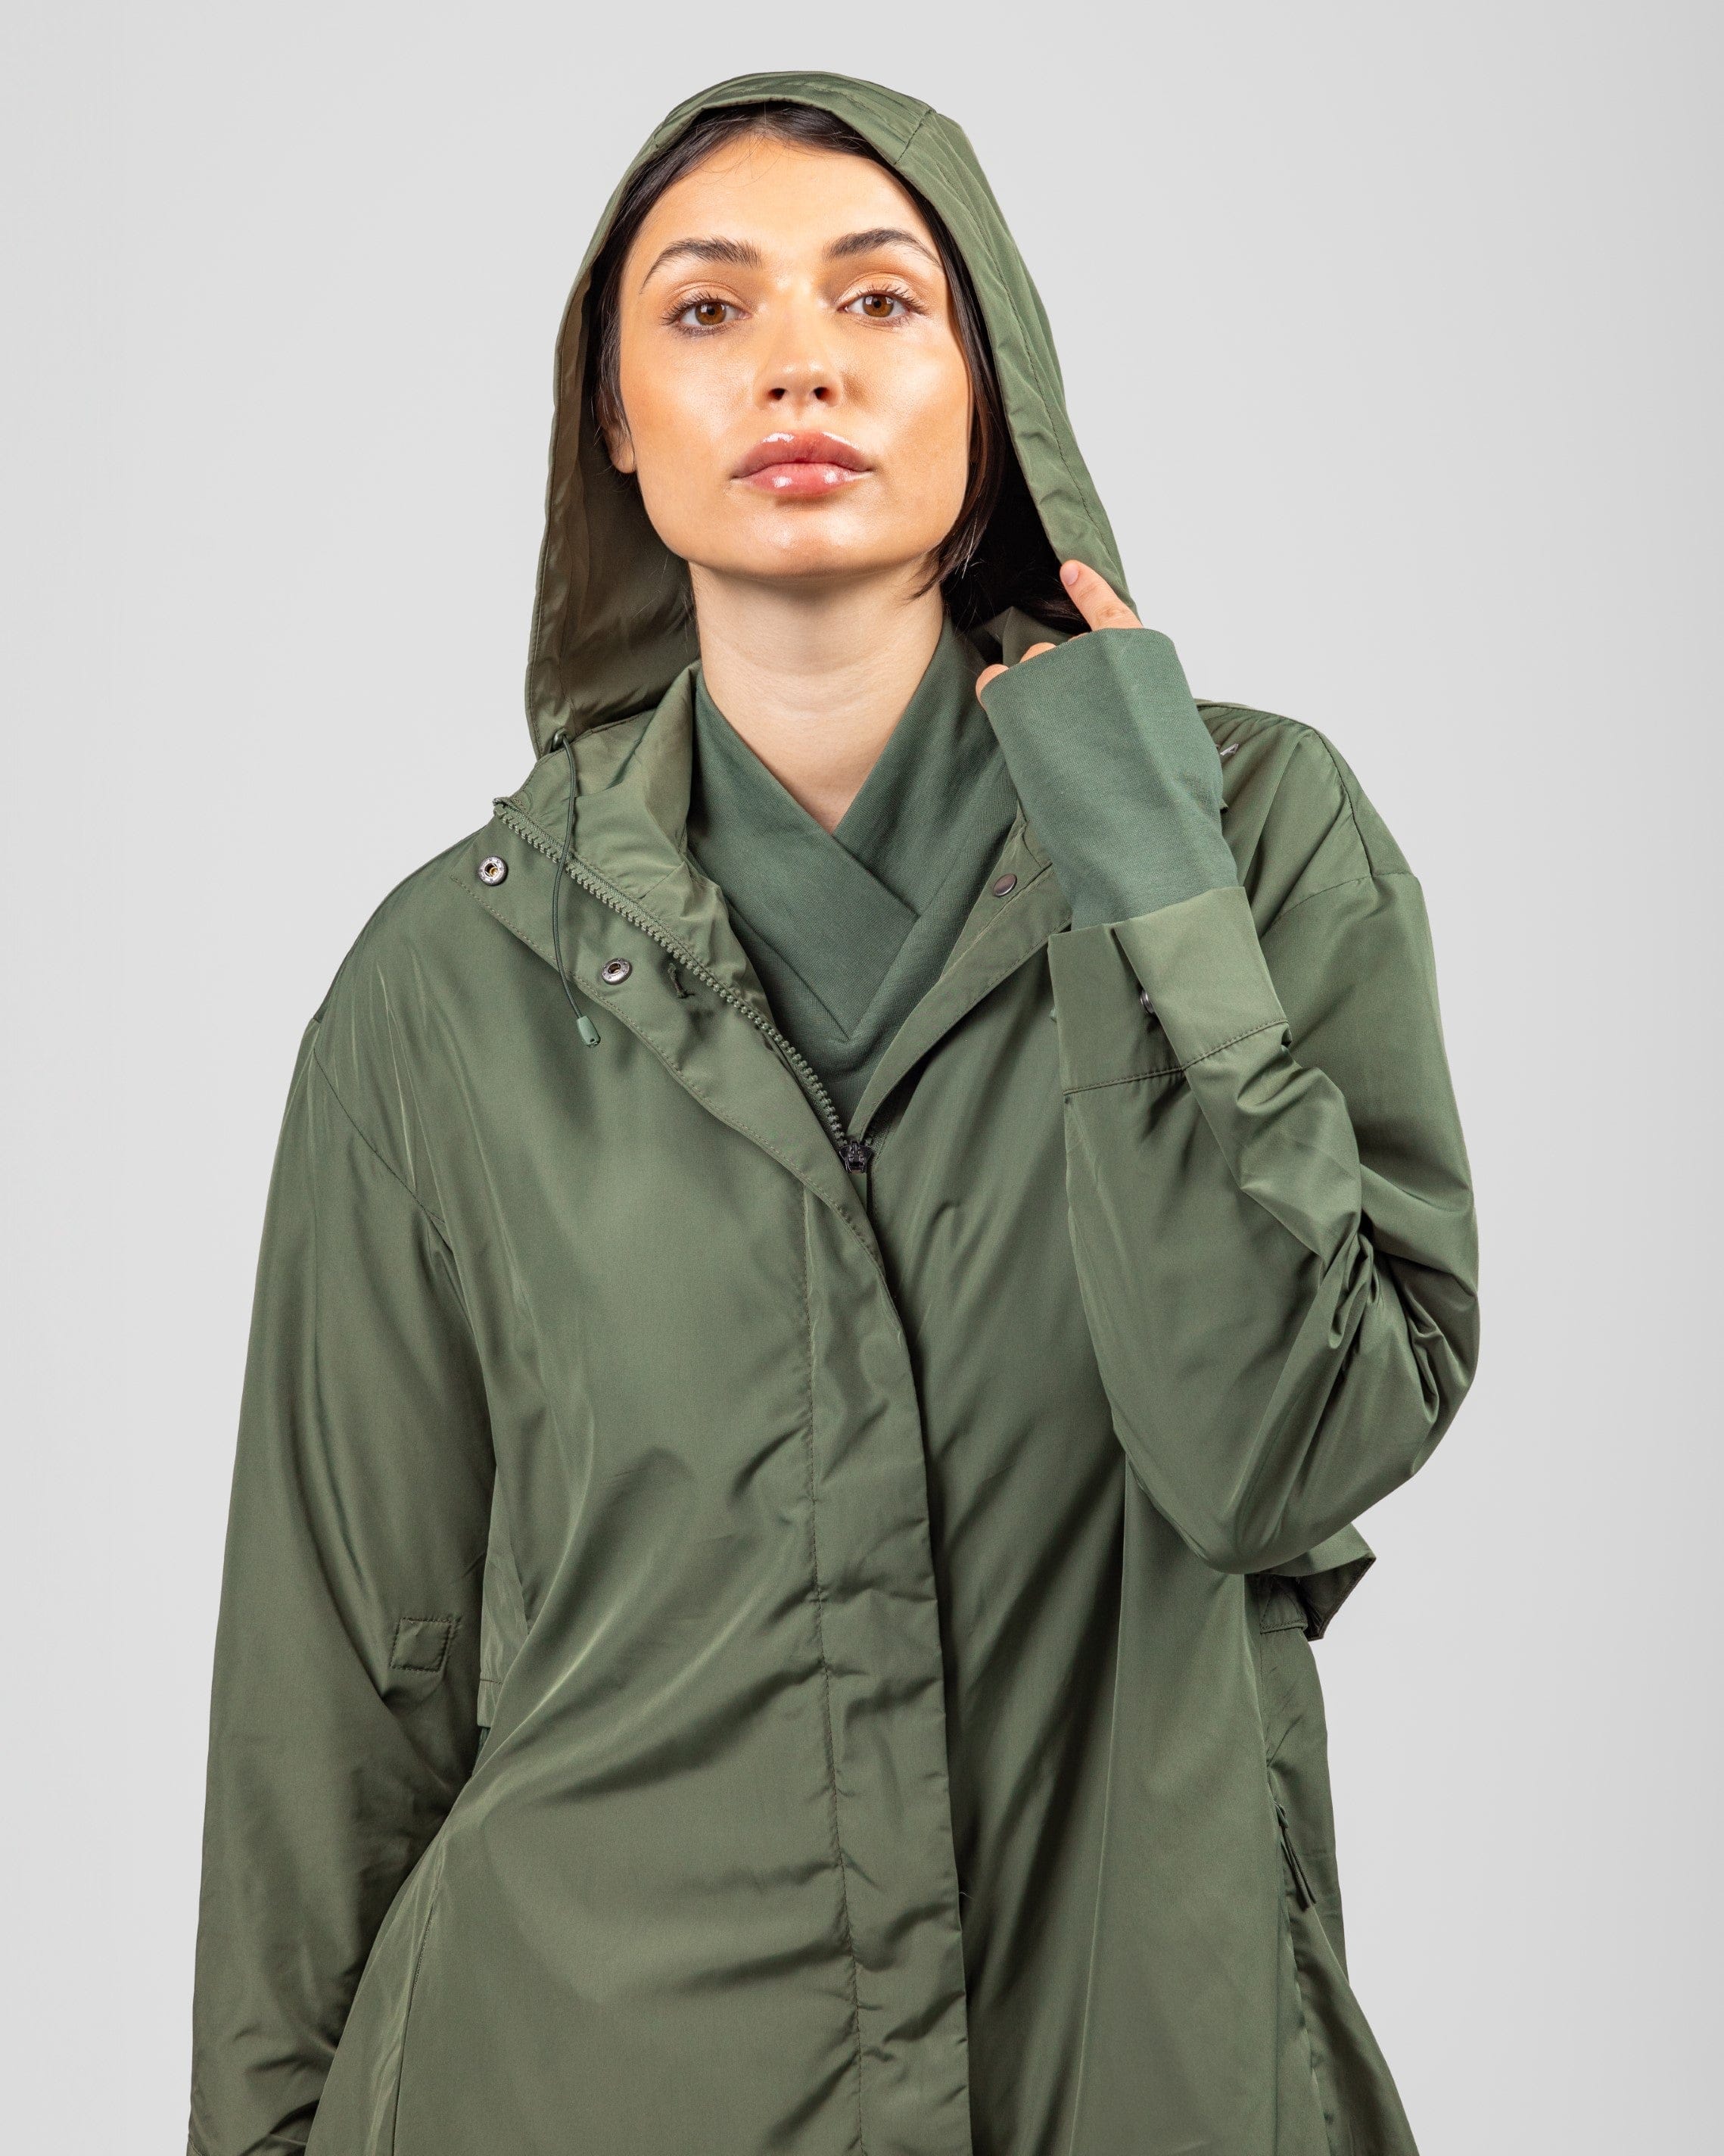 A model in a stylish olive green Modest MAK LIGHT PARKA made of lightweight fabric, with a hood, looking poised and confident.